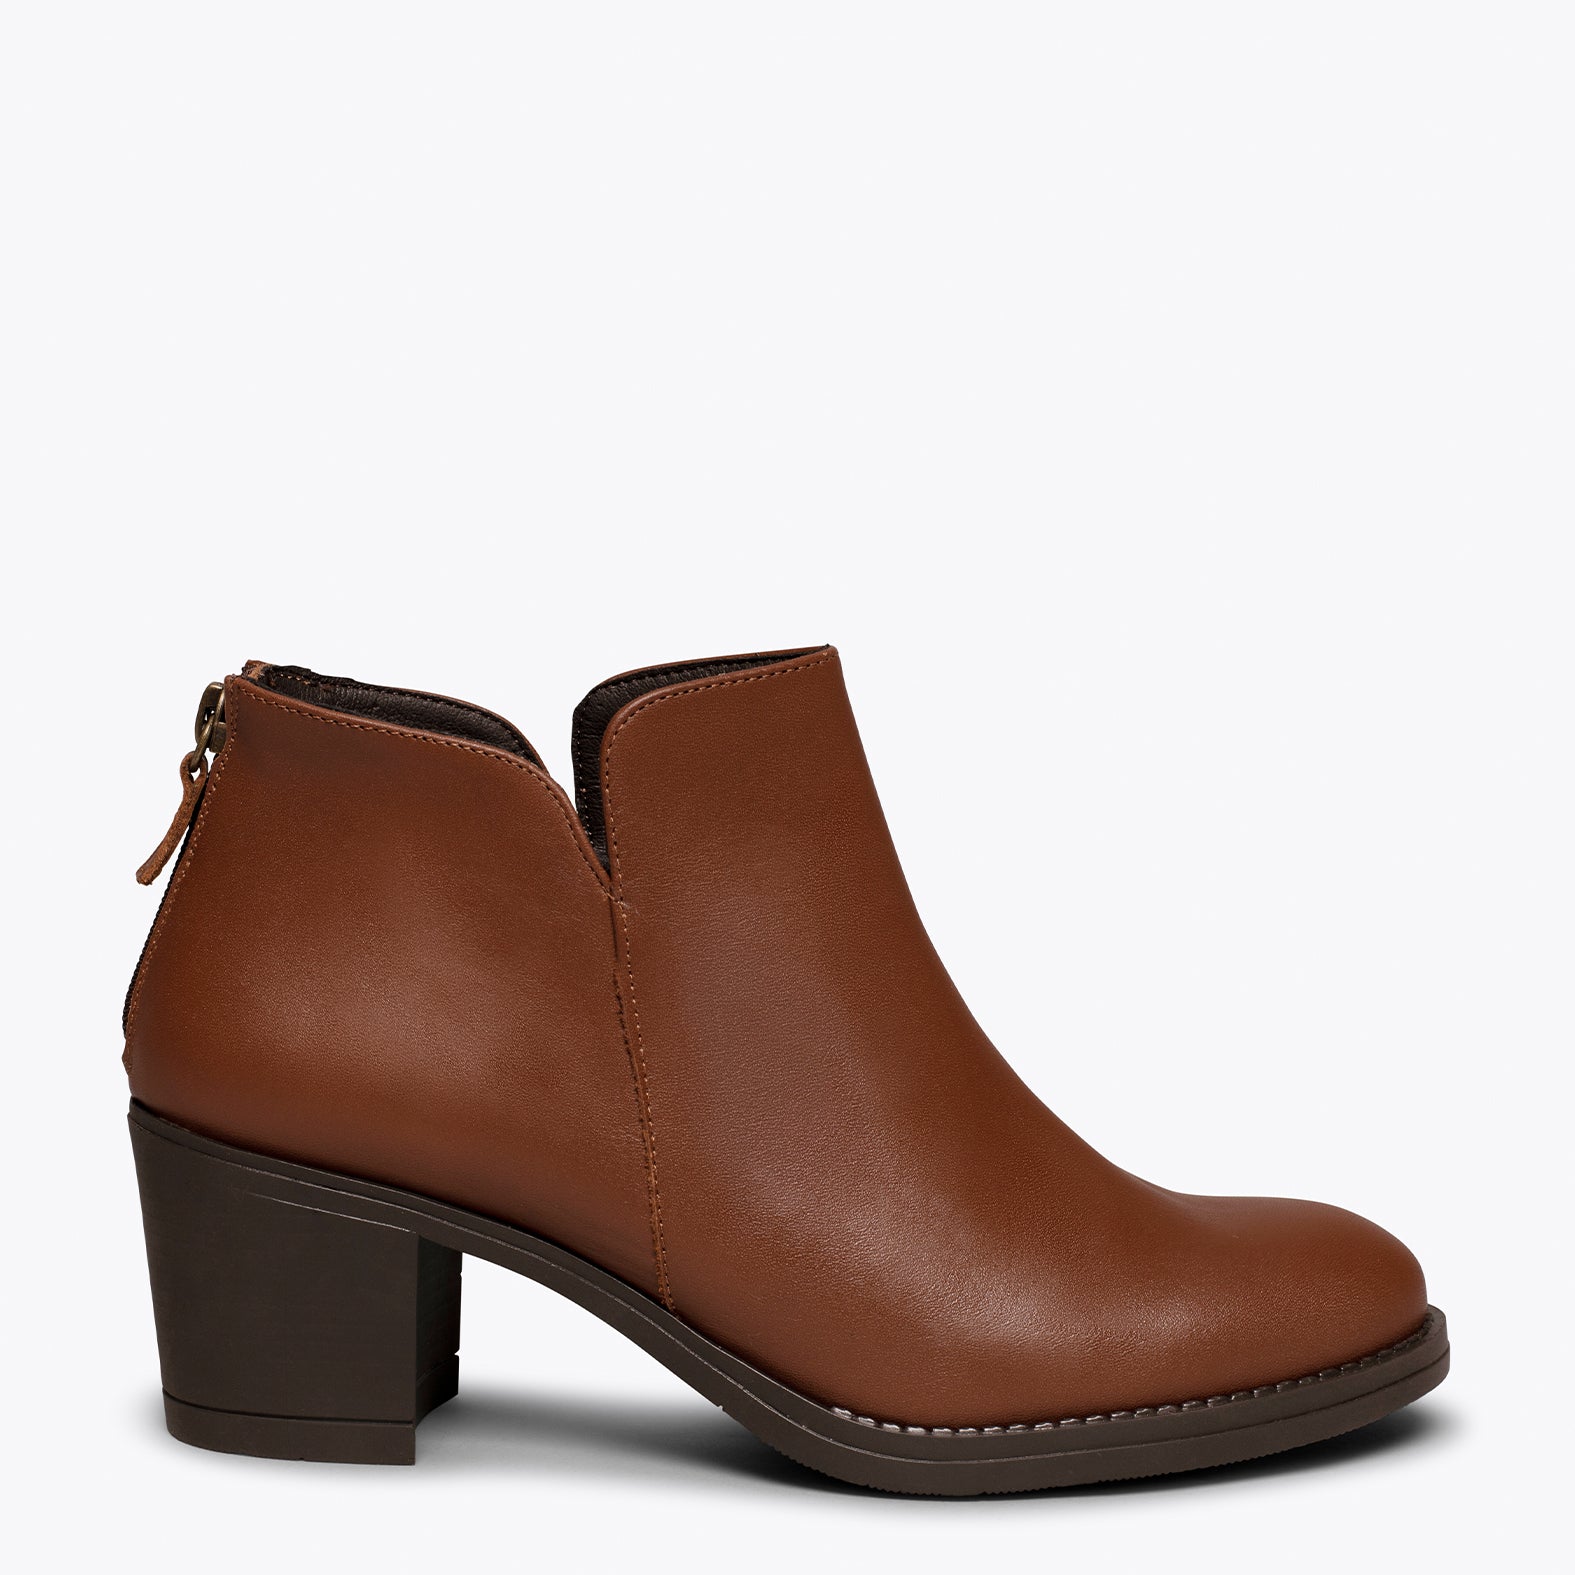 LOOK – CAMEL classic leather bootie